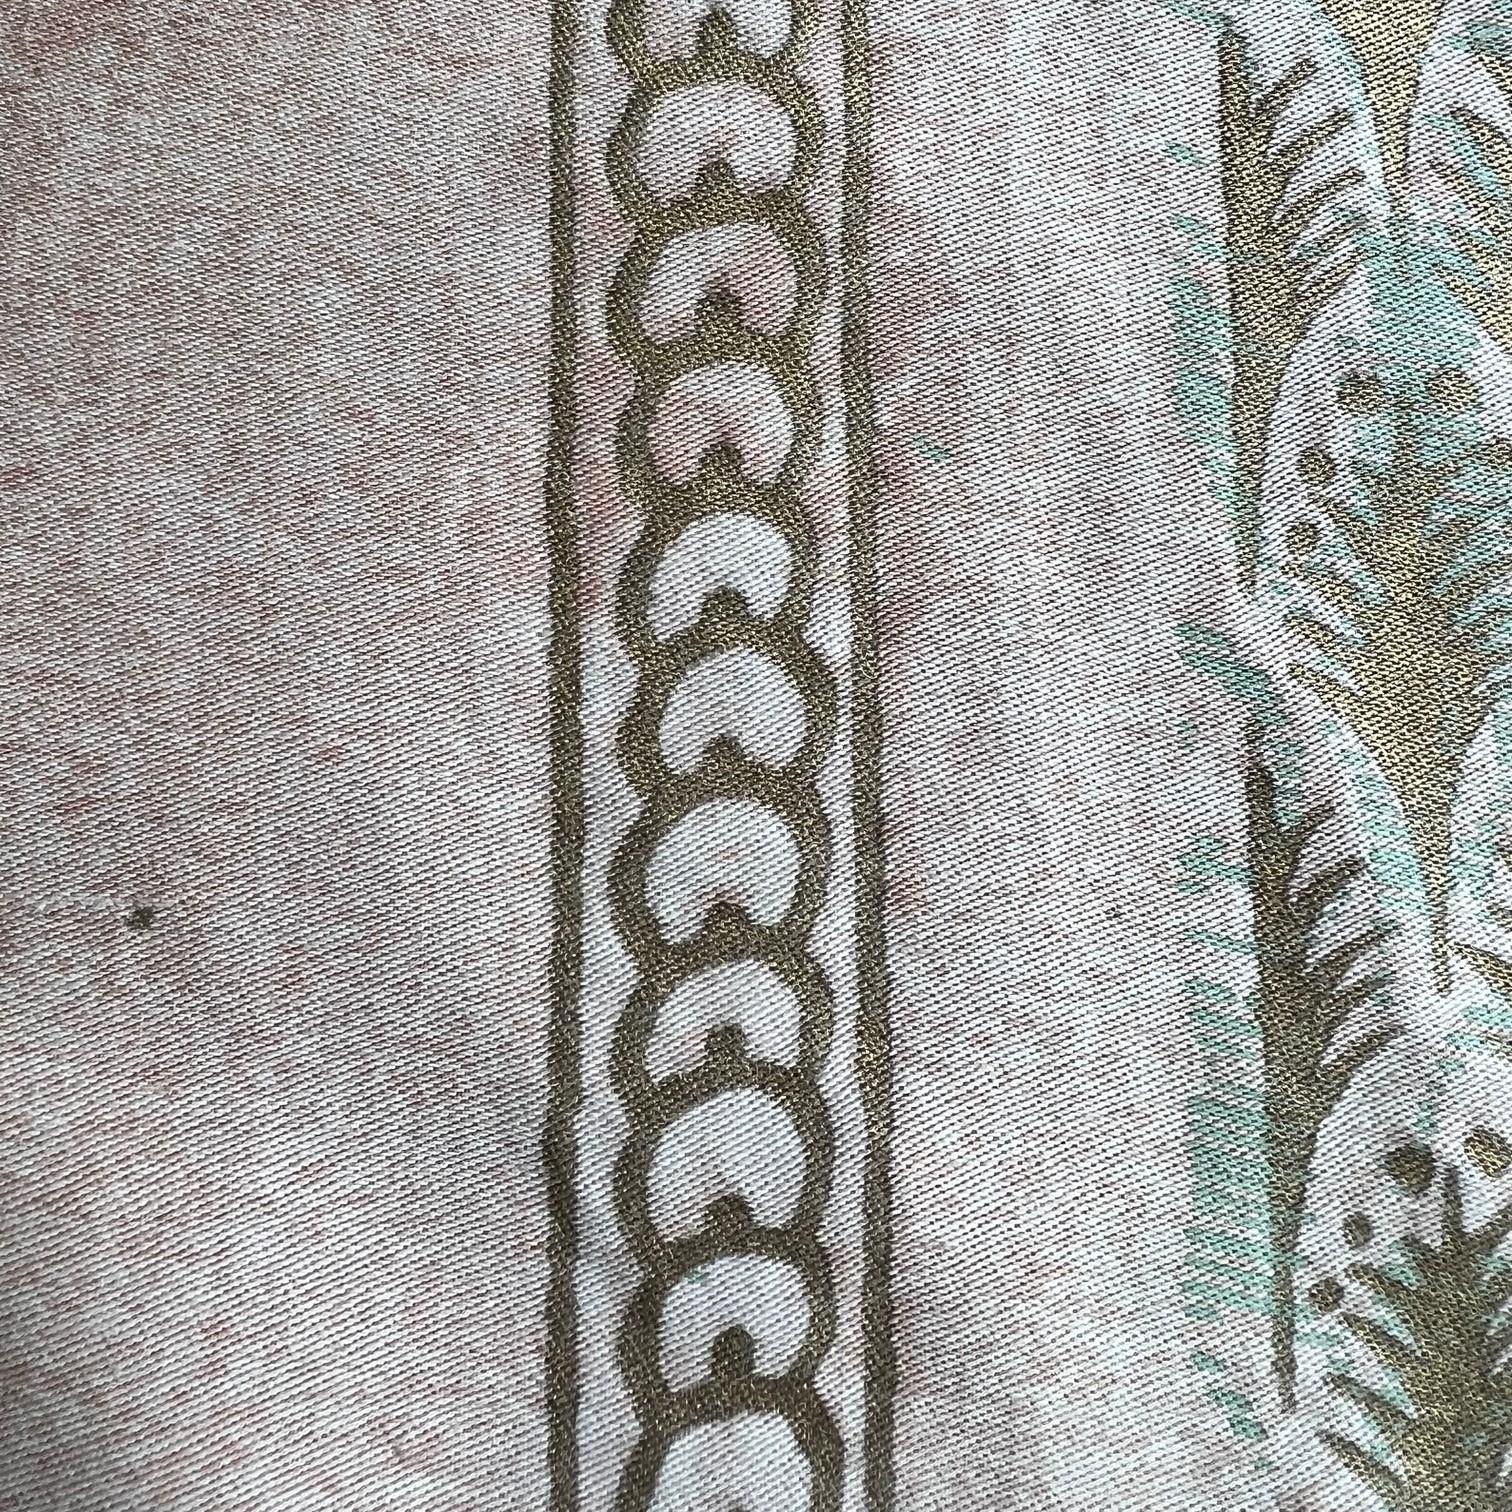 Hand-Crafted Venetian Fortuny Piumette Fabric in Pink, Aquamarine and Gold - 4.5 yards For Sale